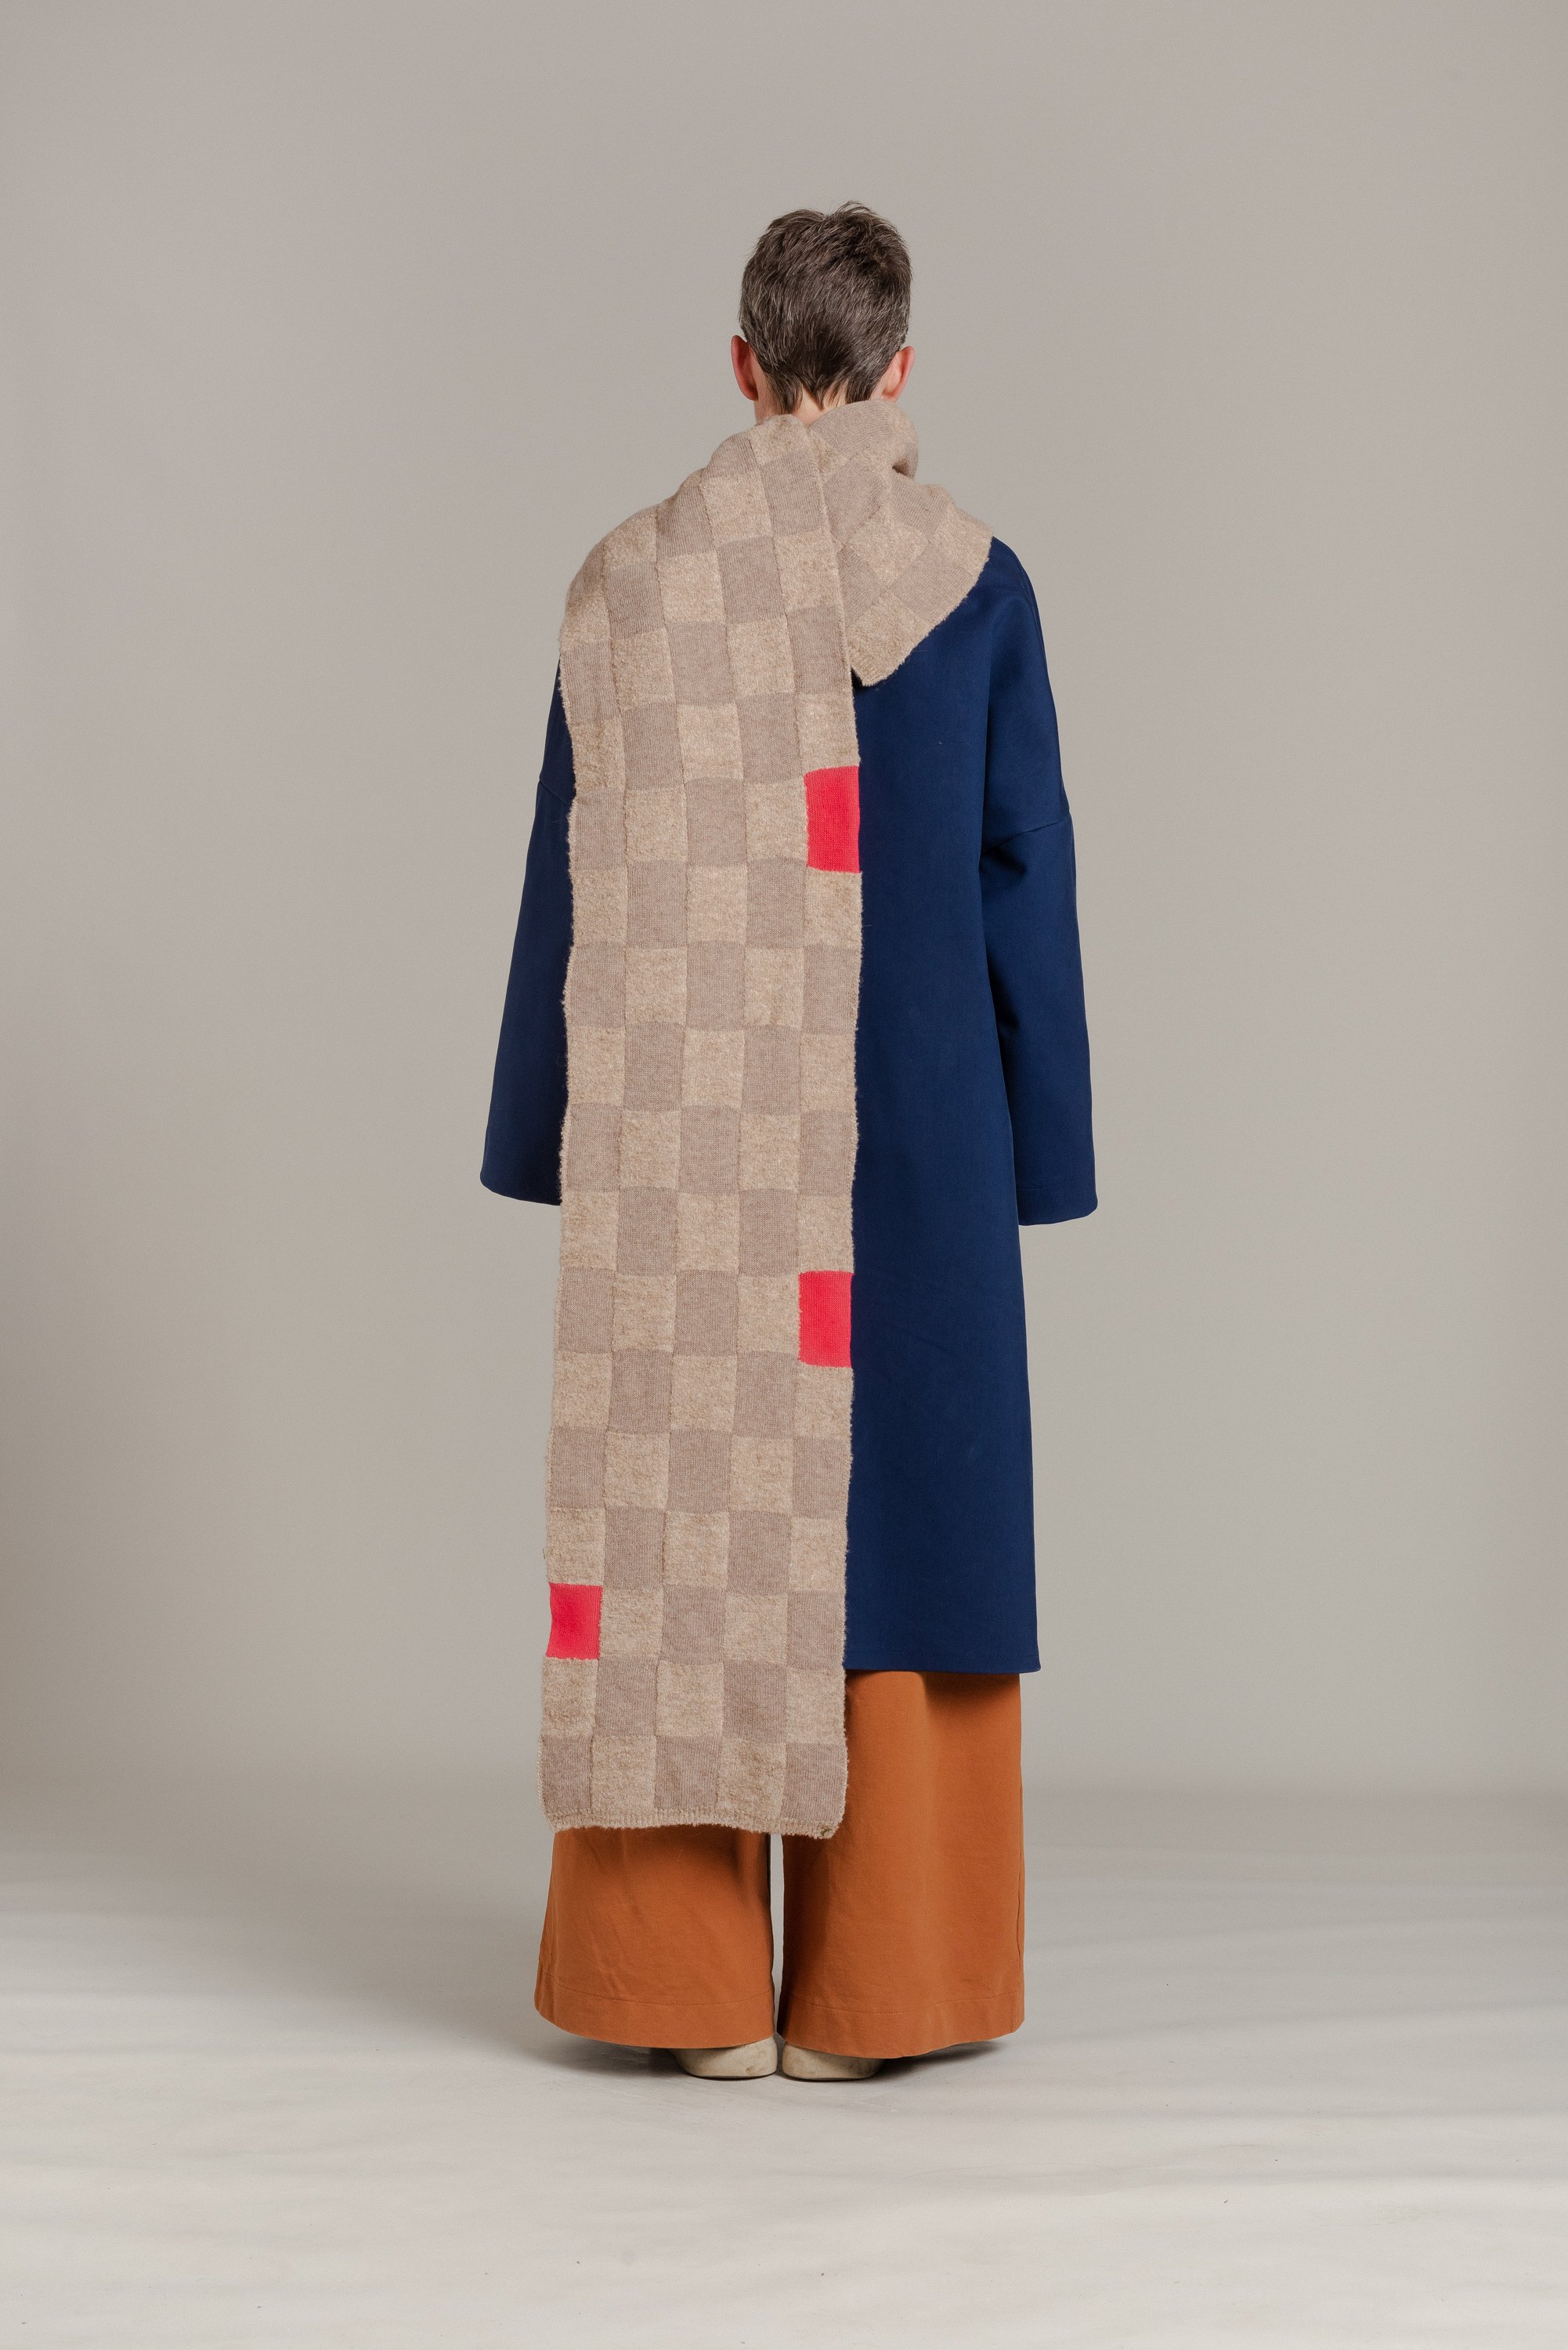 Wide shot of a woman with a knitted scarf draped over her back. She's wearing a dark blue winter coat and wide leg trousers. The scarf has a checkered pattern in beige with coral pink details.